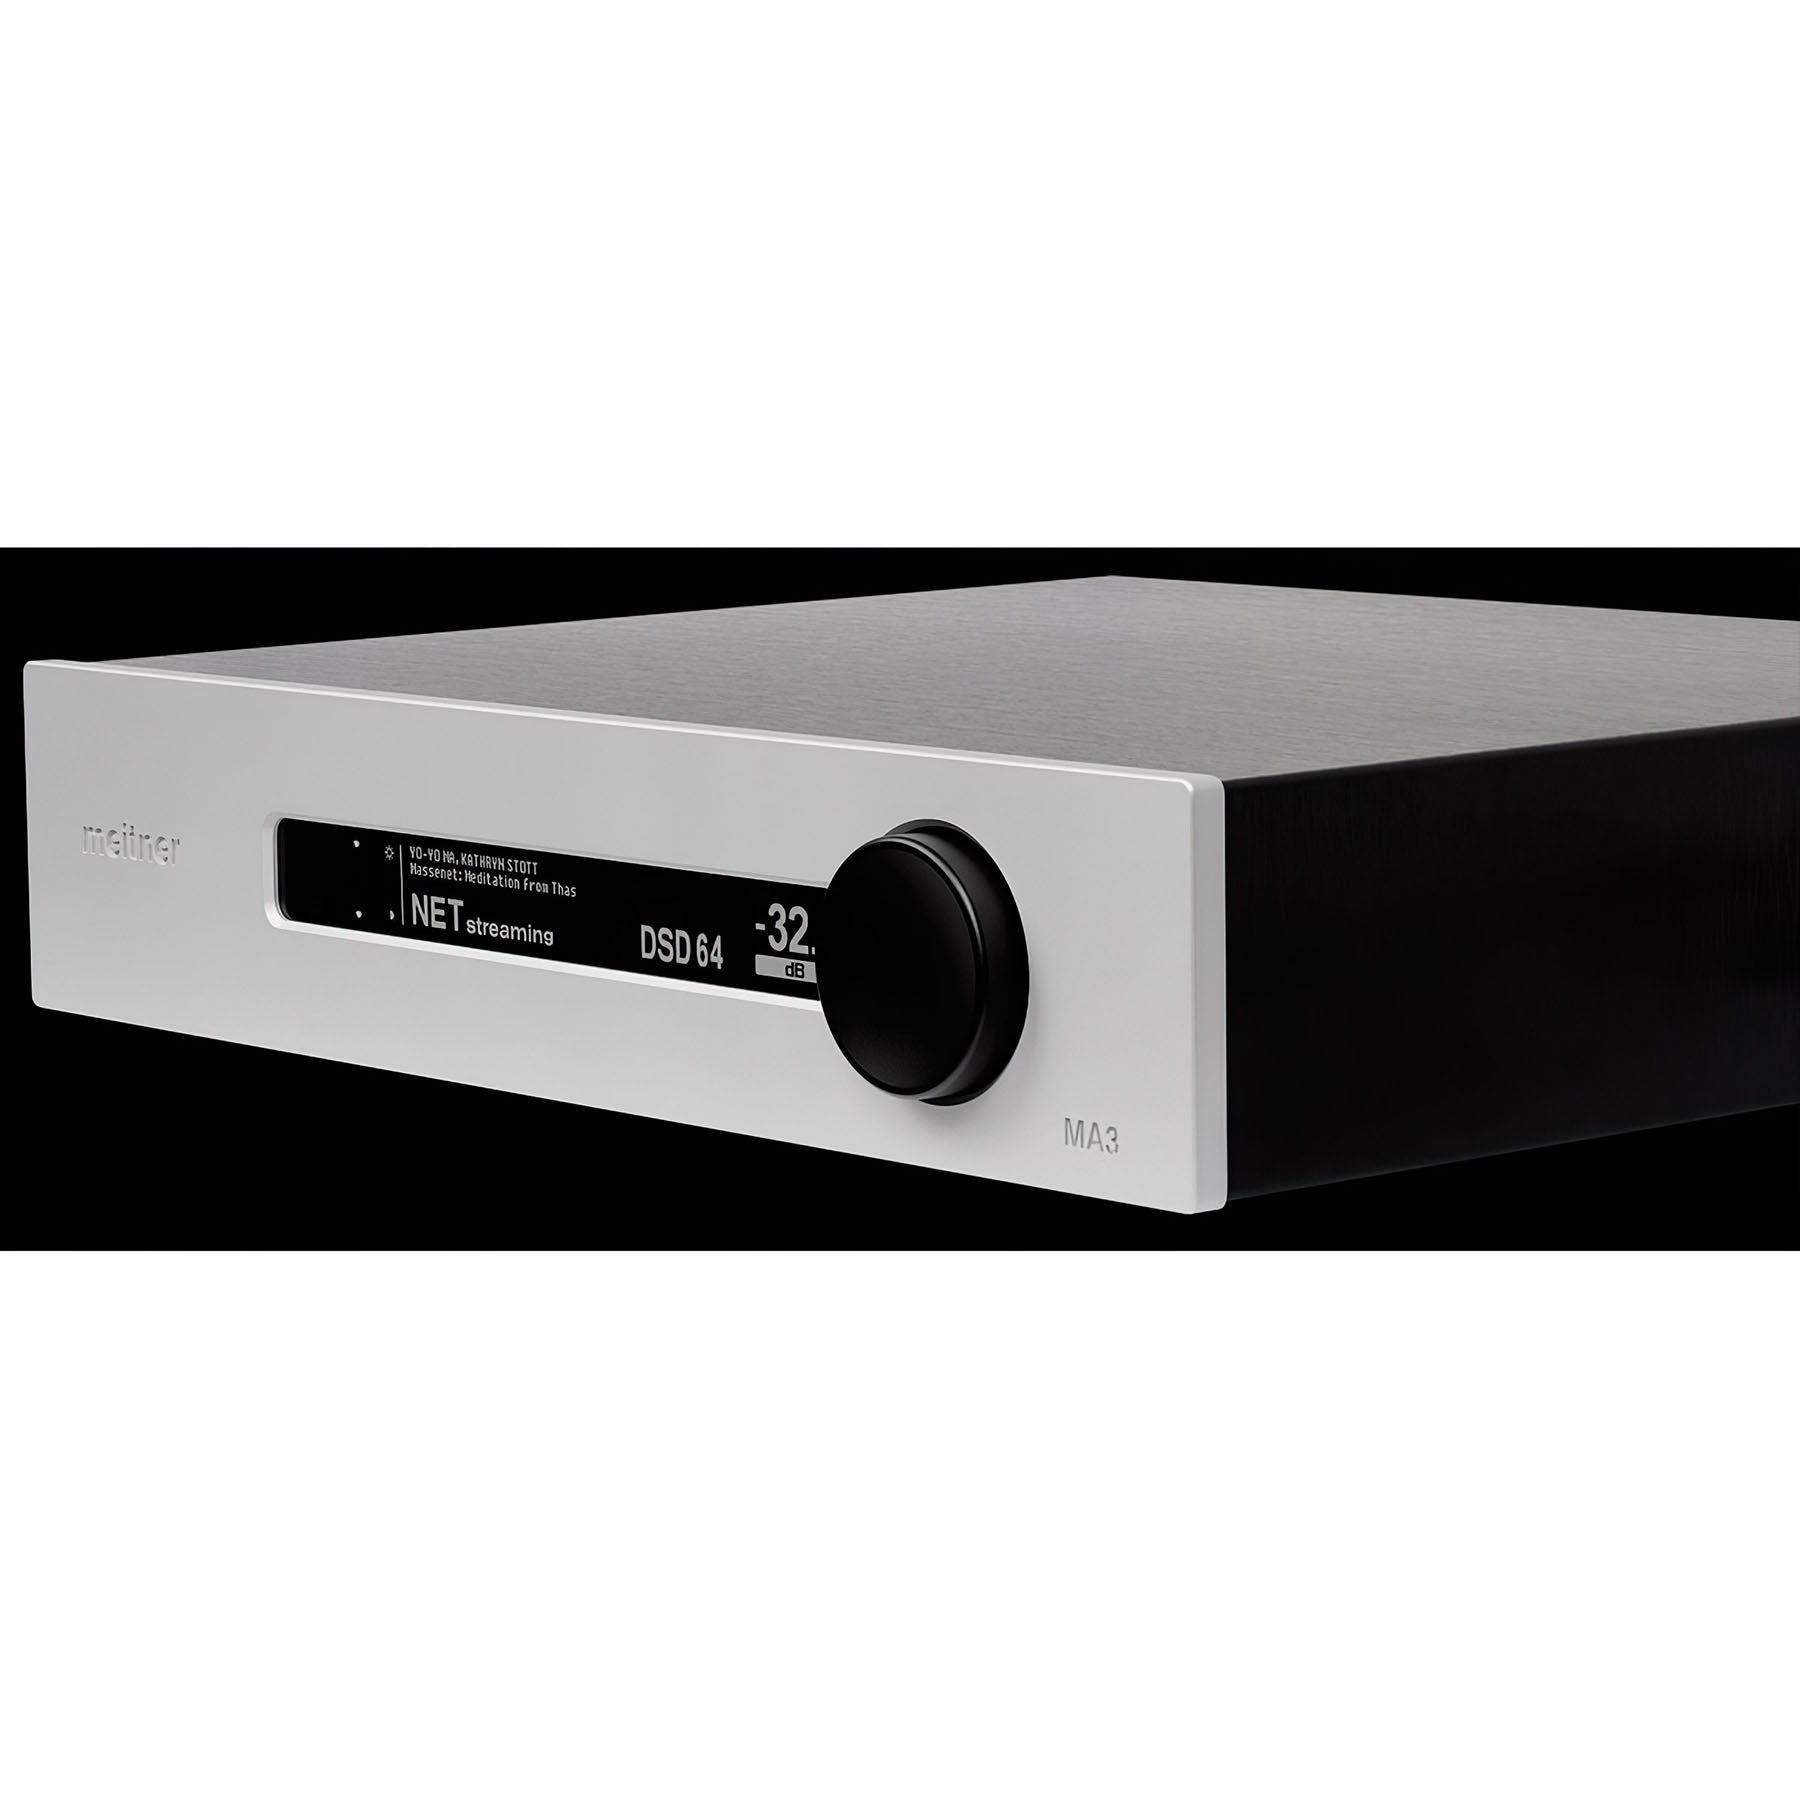 EMM Labs/Meitner MA3 Integrated DAC with Streamer & Volume Control